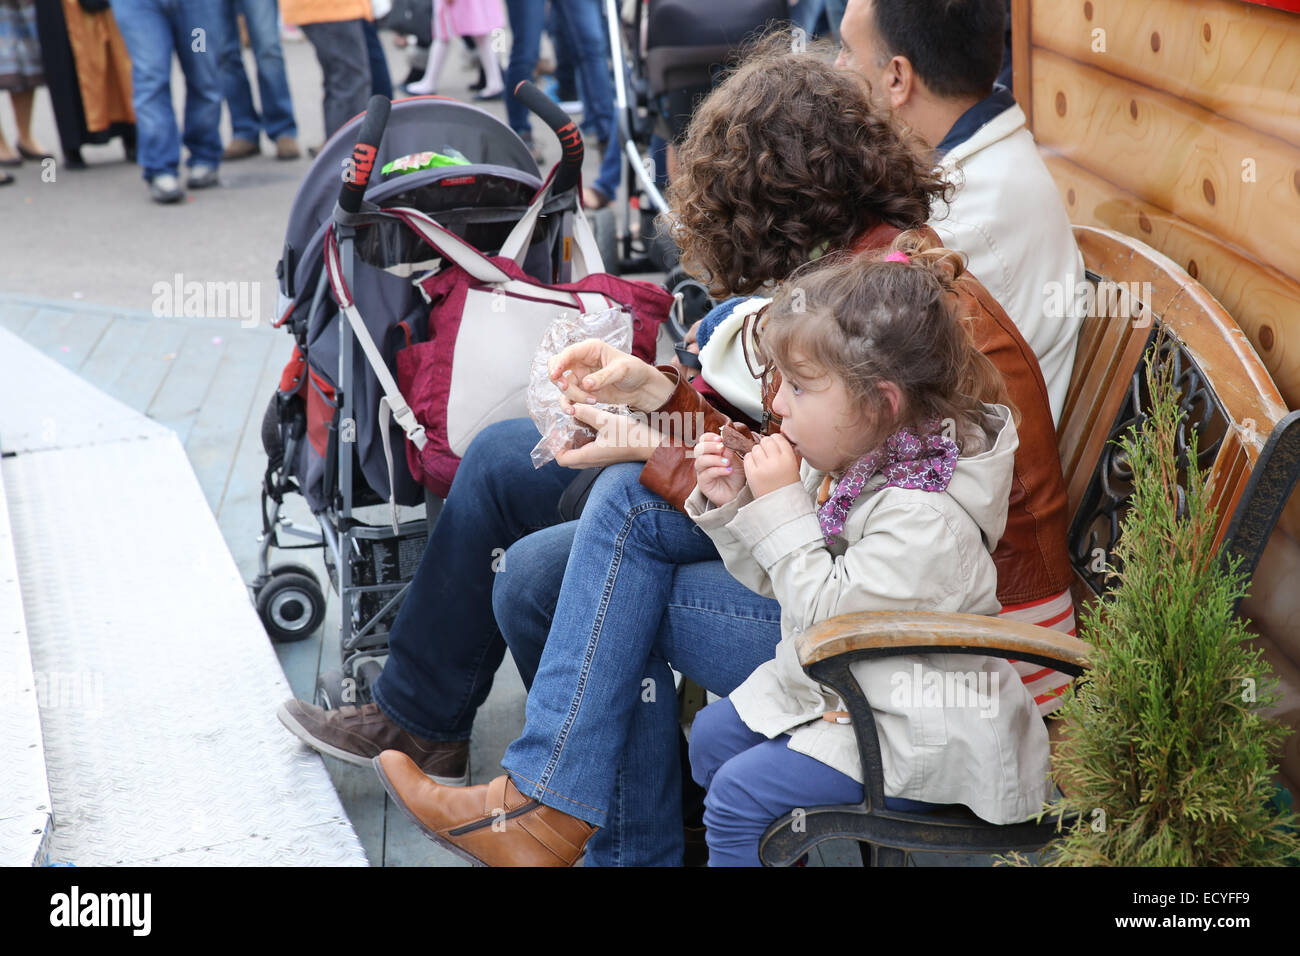 young girl eating snack sitting bench outdoor oktoberfest festival germany Stock Photo